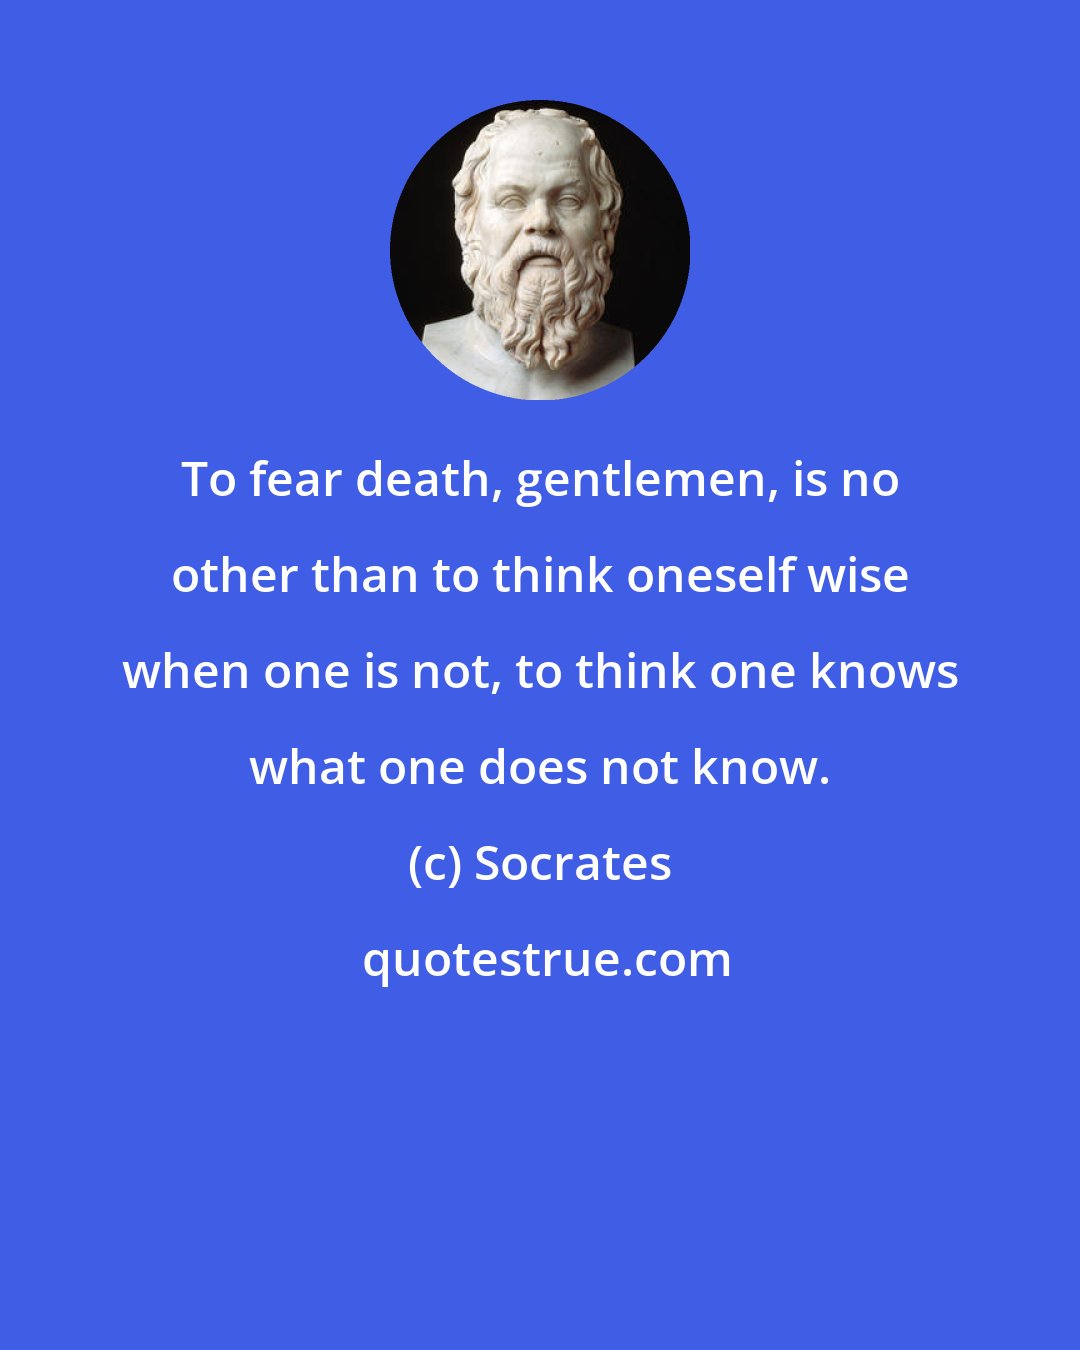 Socrates: To fear death, gentlemen, is no other than to think oneself wise when one is not, to think one knows what one does not know.